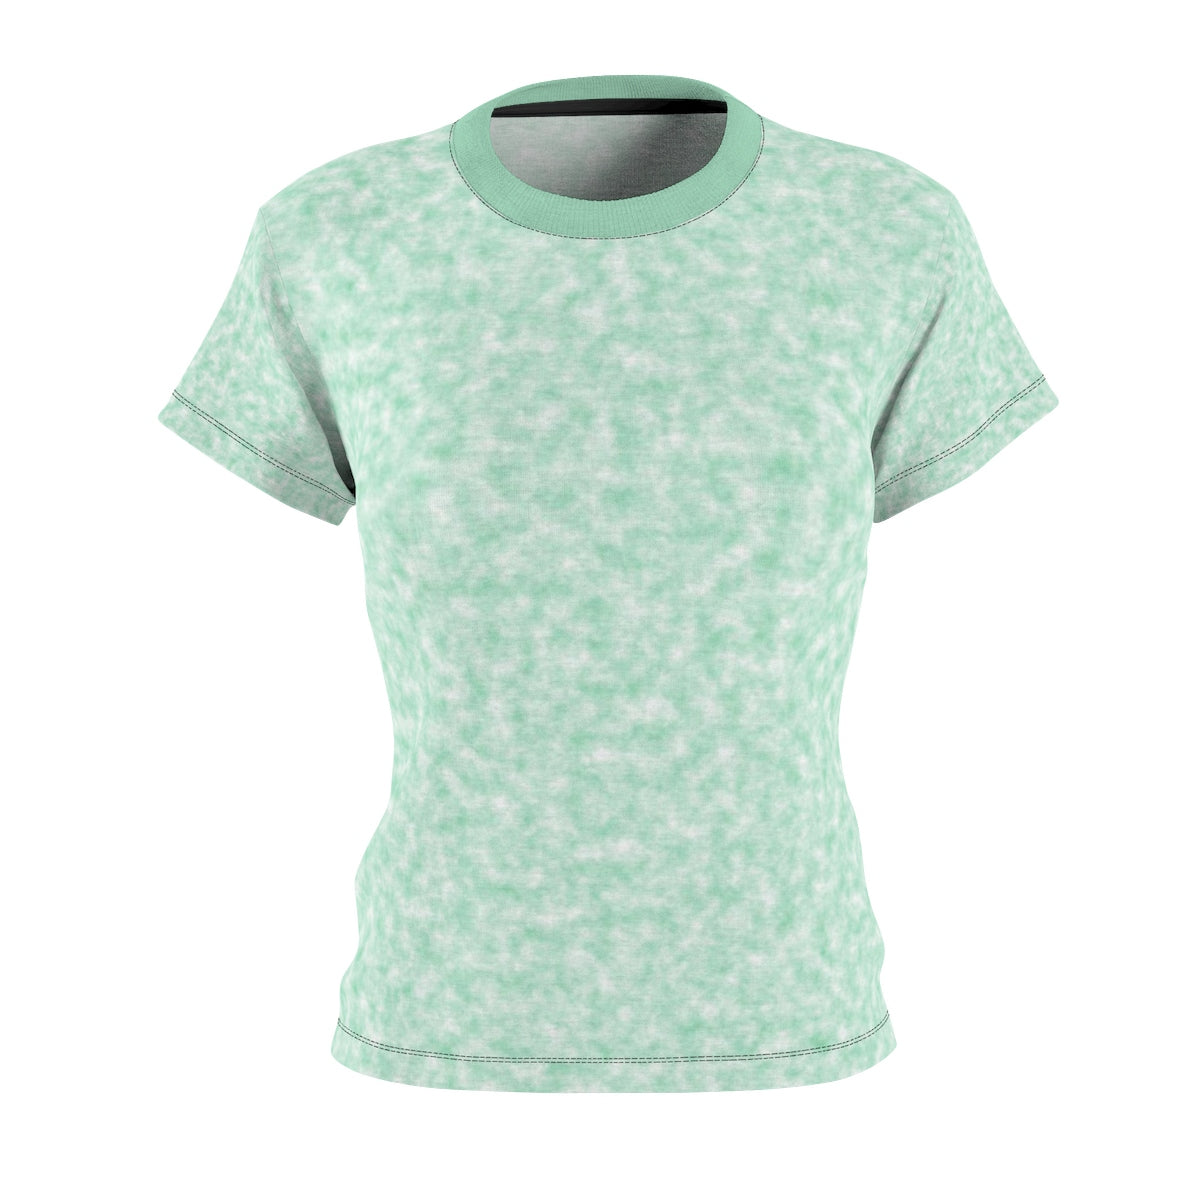 Seafoam Green and White Clouds Women's Tee